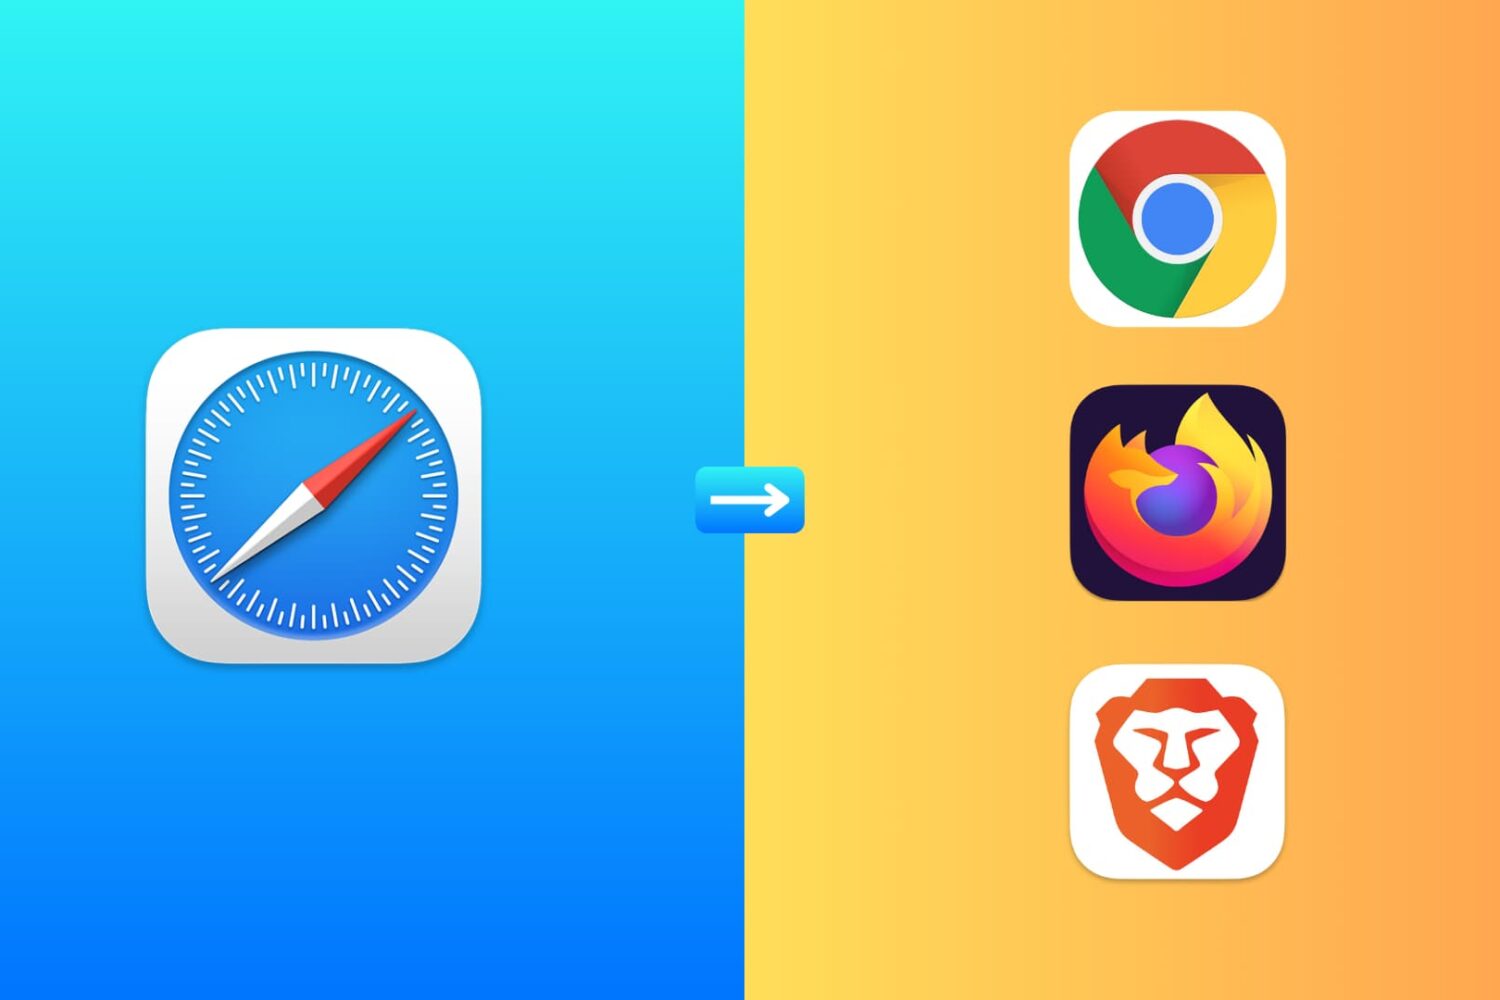 Image illustration showing a move from Safari to Chrome, Firefox, and Brave browsers